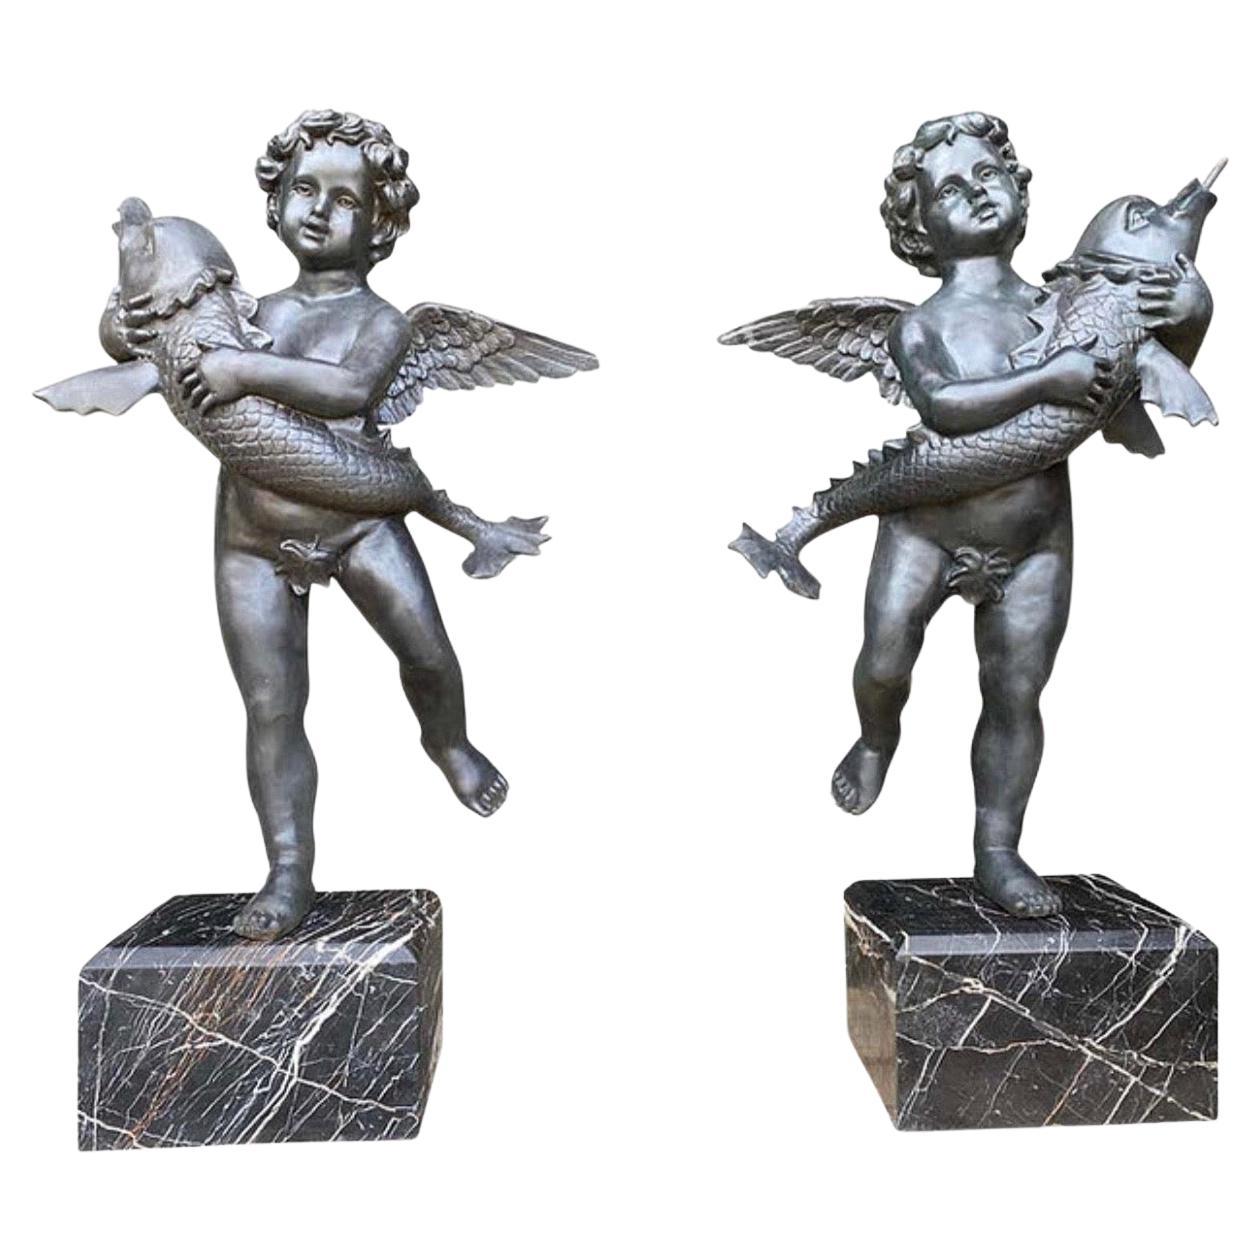 A large impressive pair of 20th century bronze Cherub fountains with fish. Situated on Verdi Antico marble bases. This pair are fully functional working fountains, perfect for garden use and ponds.